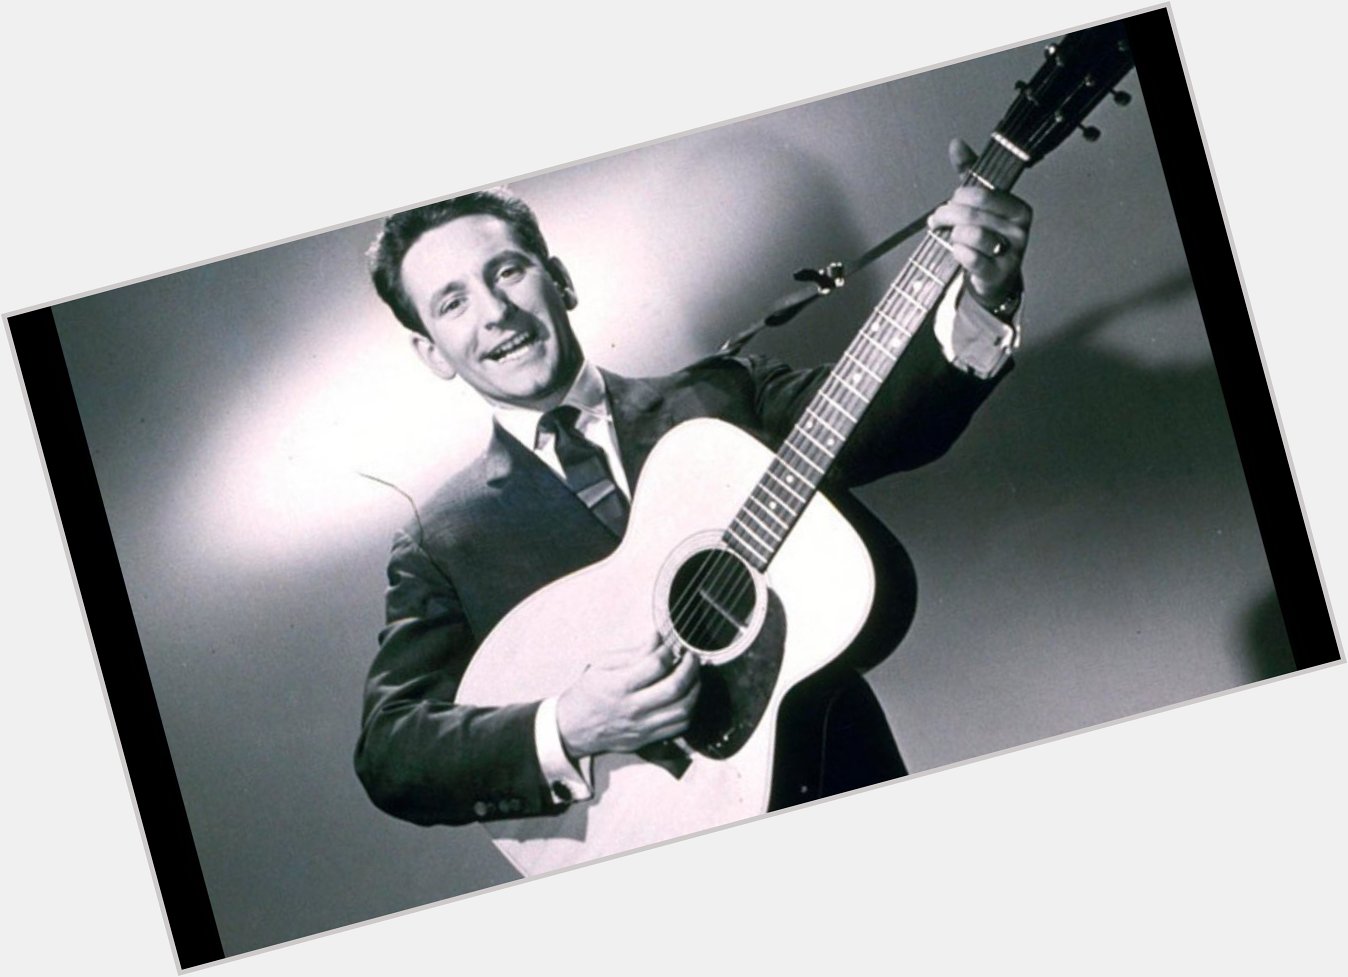 Lonnie Donegan would have turned 90 today.
Happy birthday 